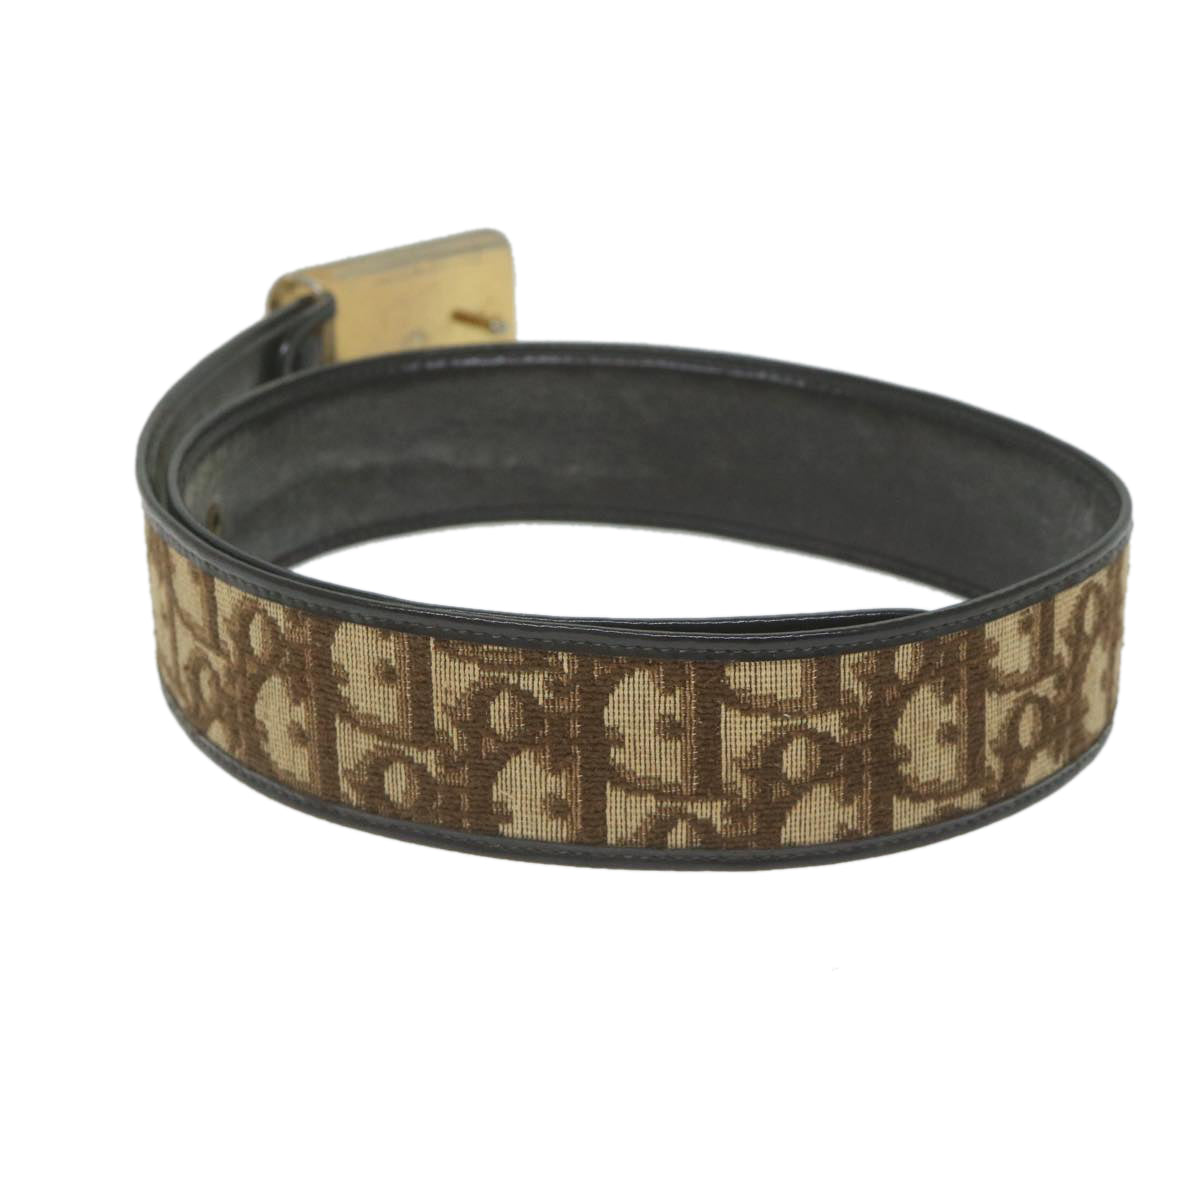 Christian Dior Trotter Canvas Belt 24.8""-28.7"" Brown Auth ti1395